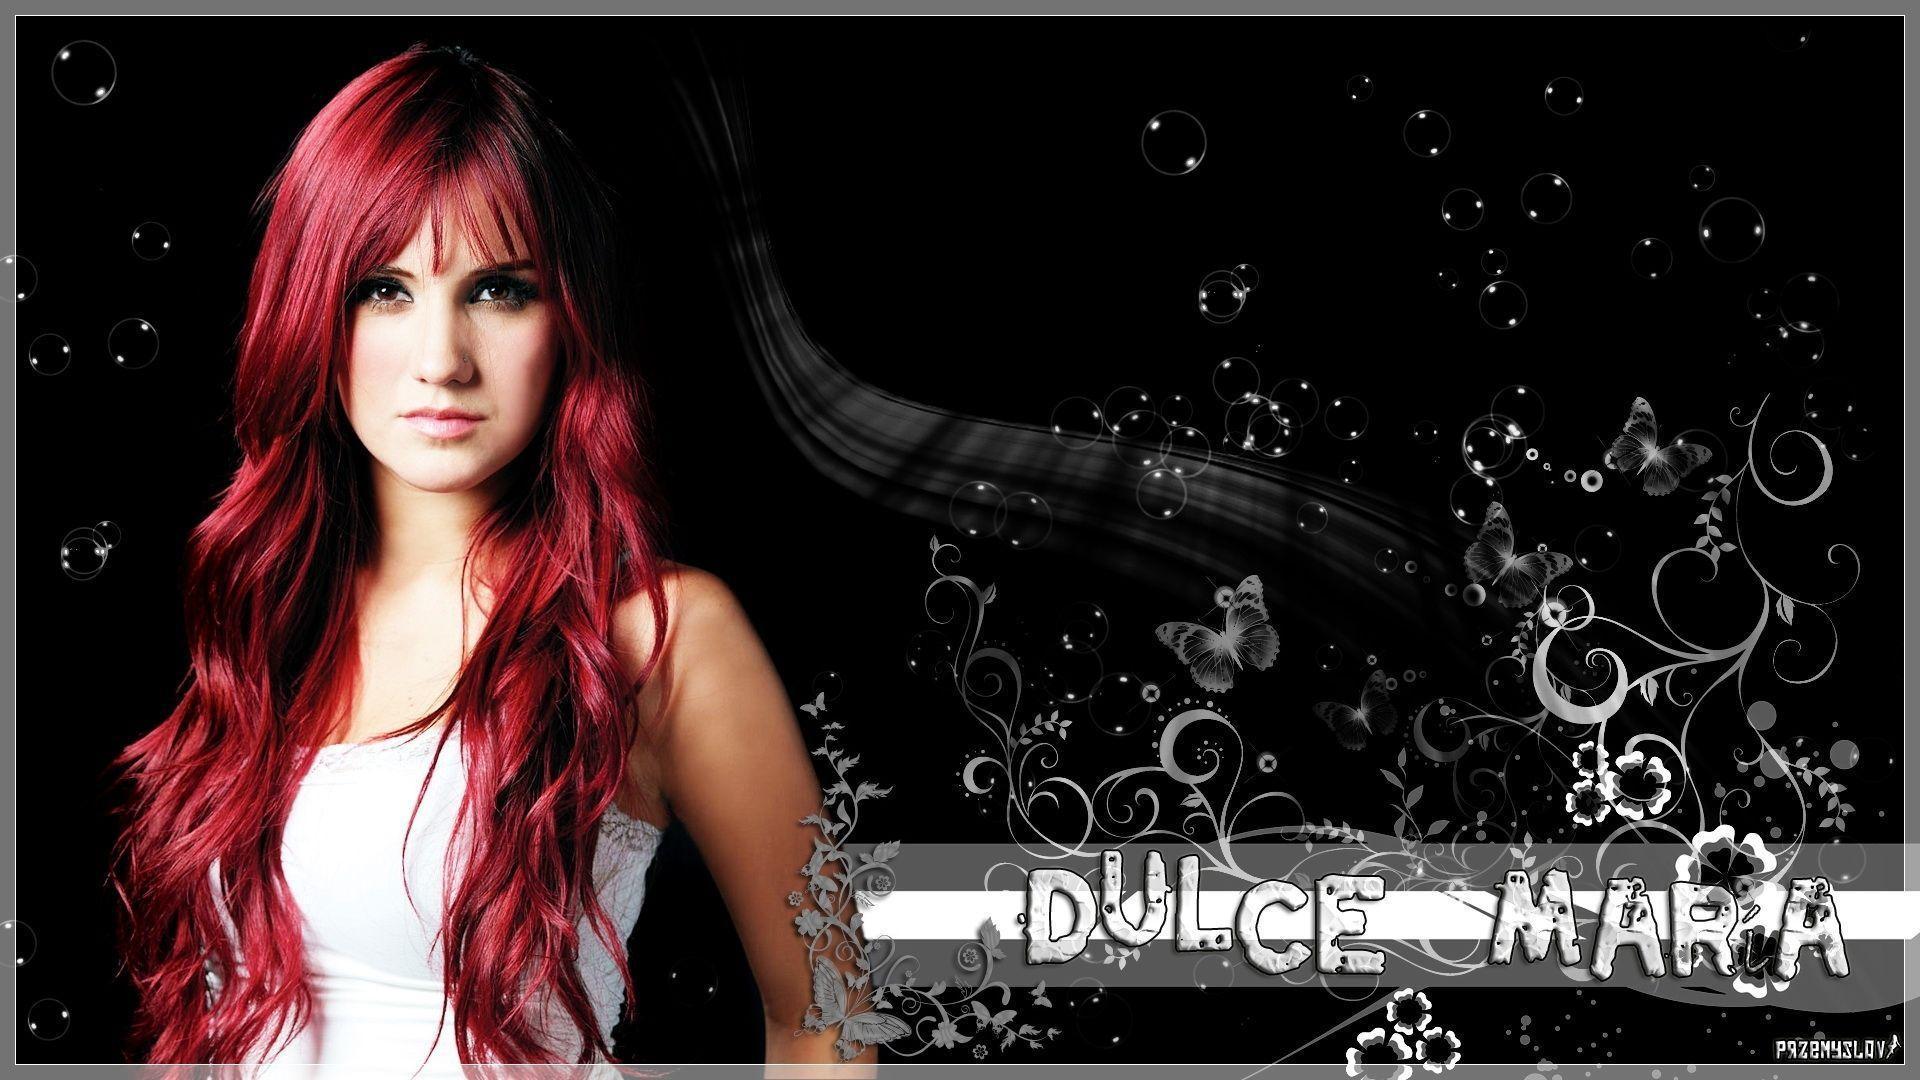 Wallpaper___Dulce_Maria__1__by